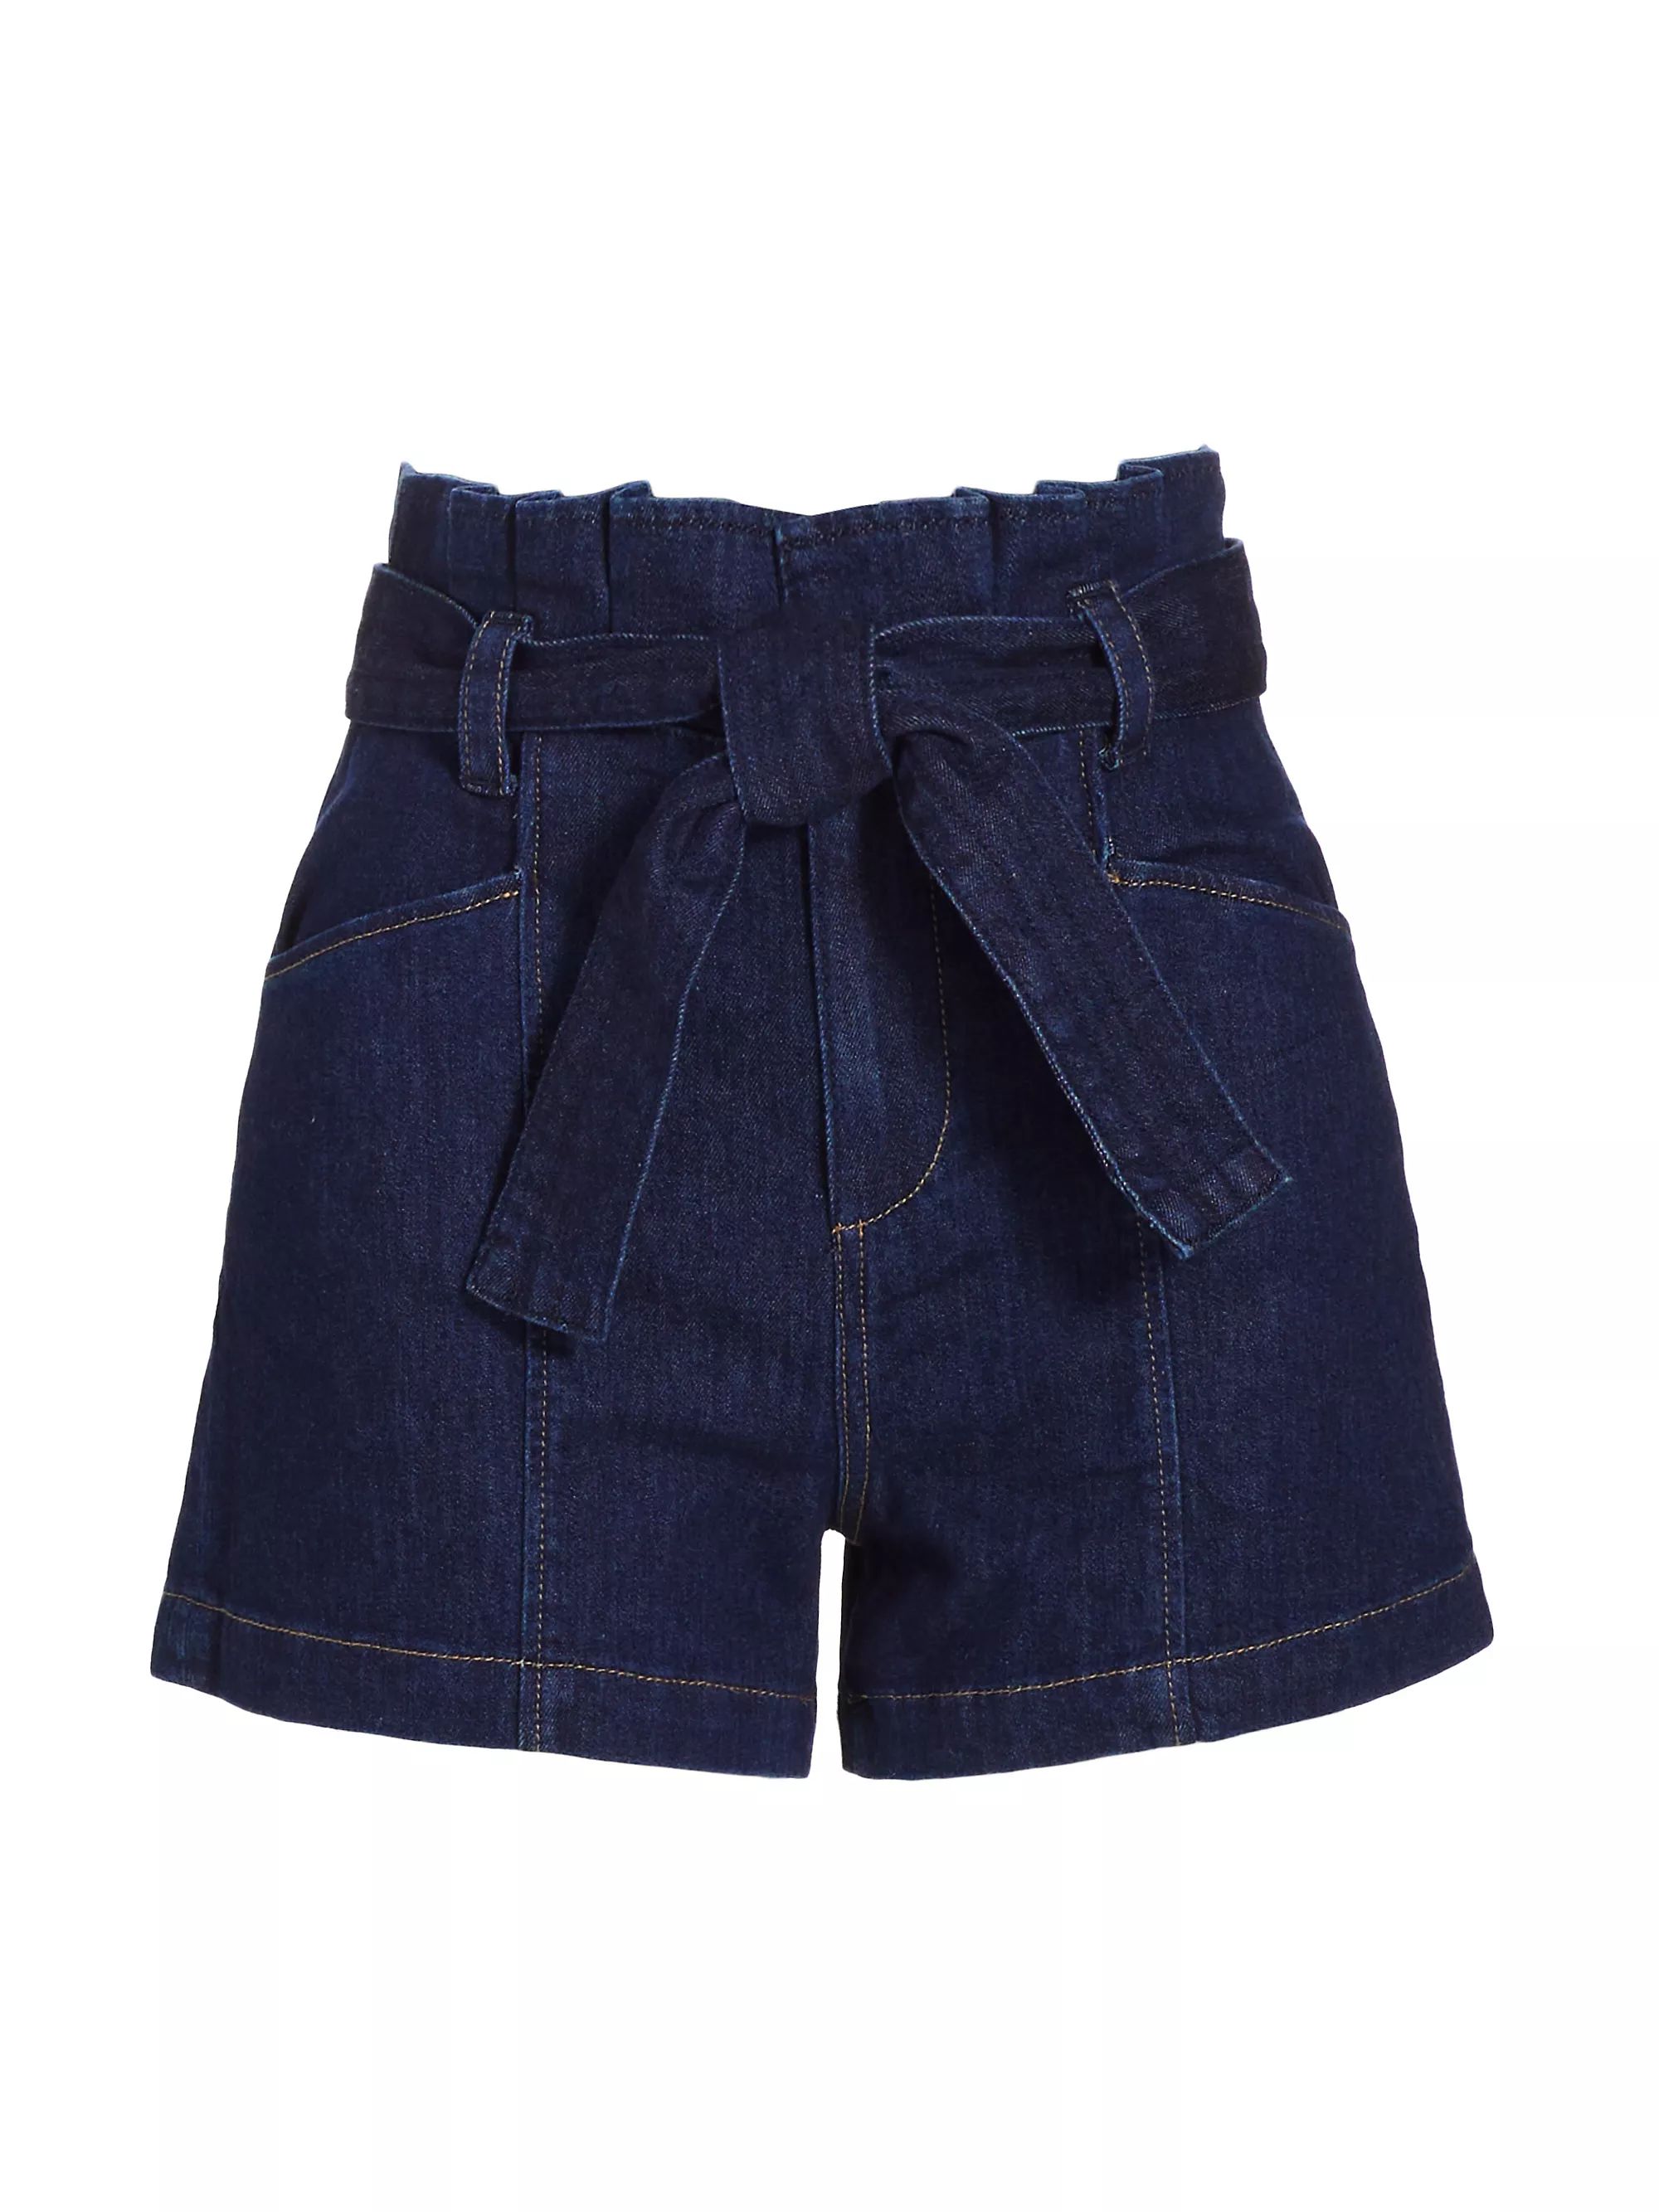 Anessa Belted Denim Shorts | Saks Fifth Avenue